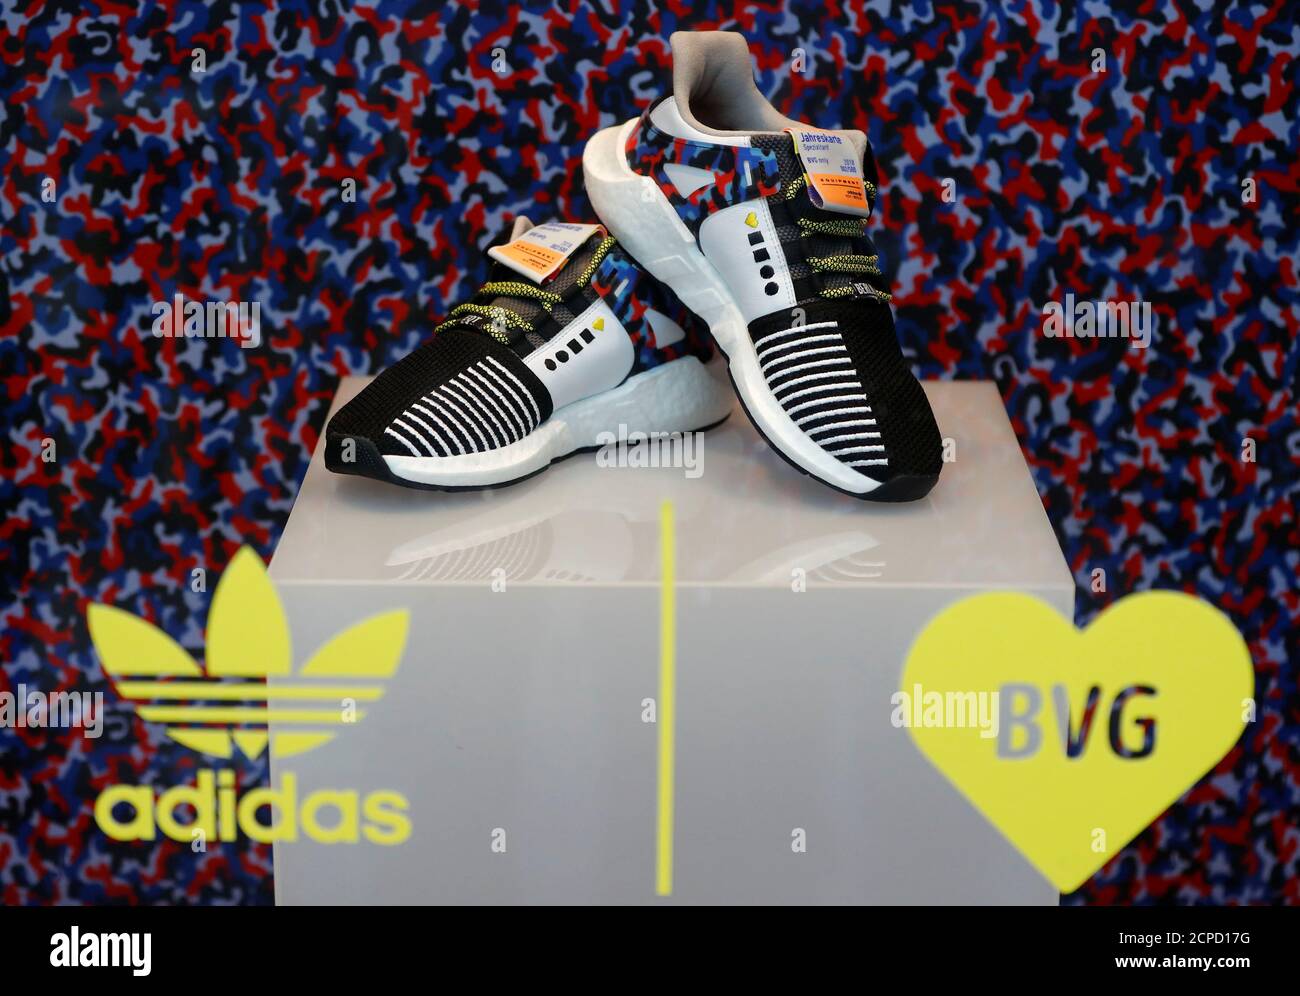 adidas sneakers limited edition